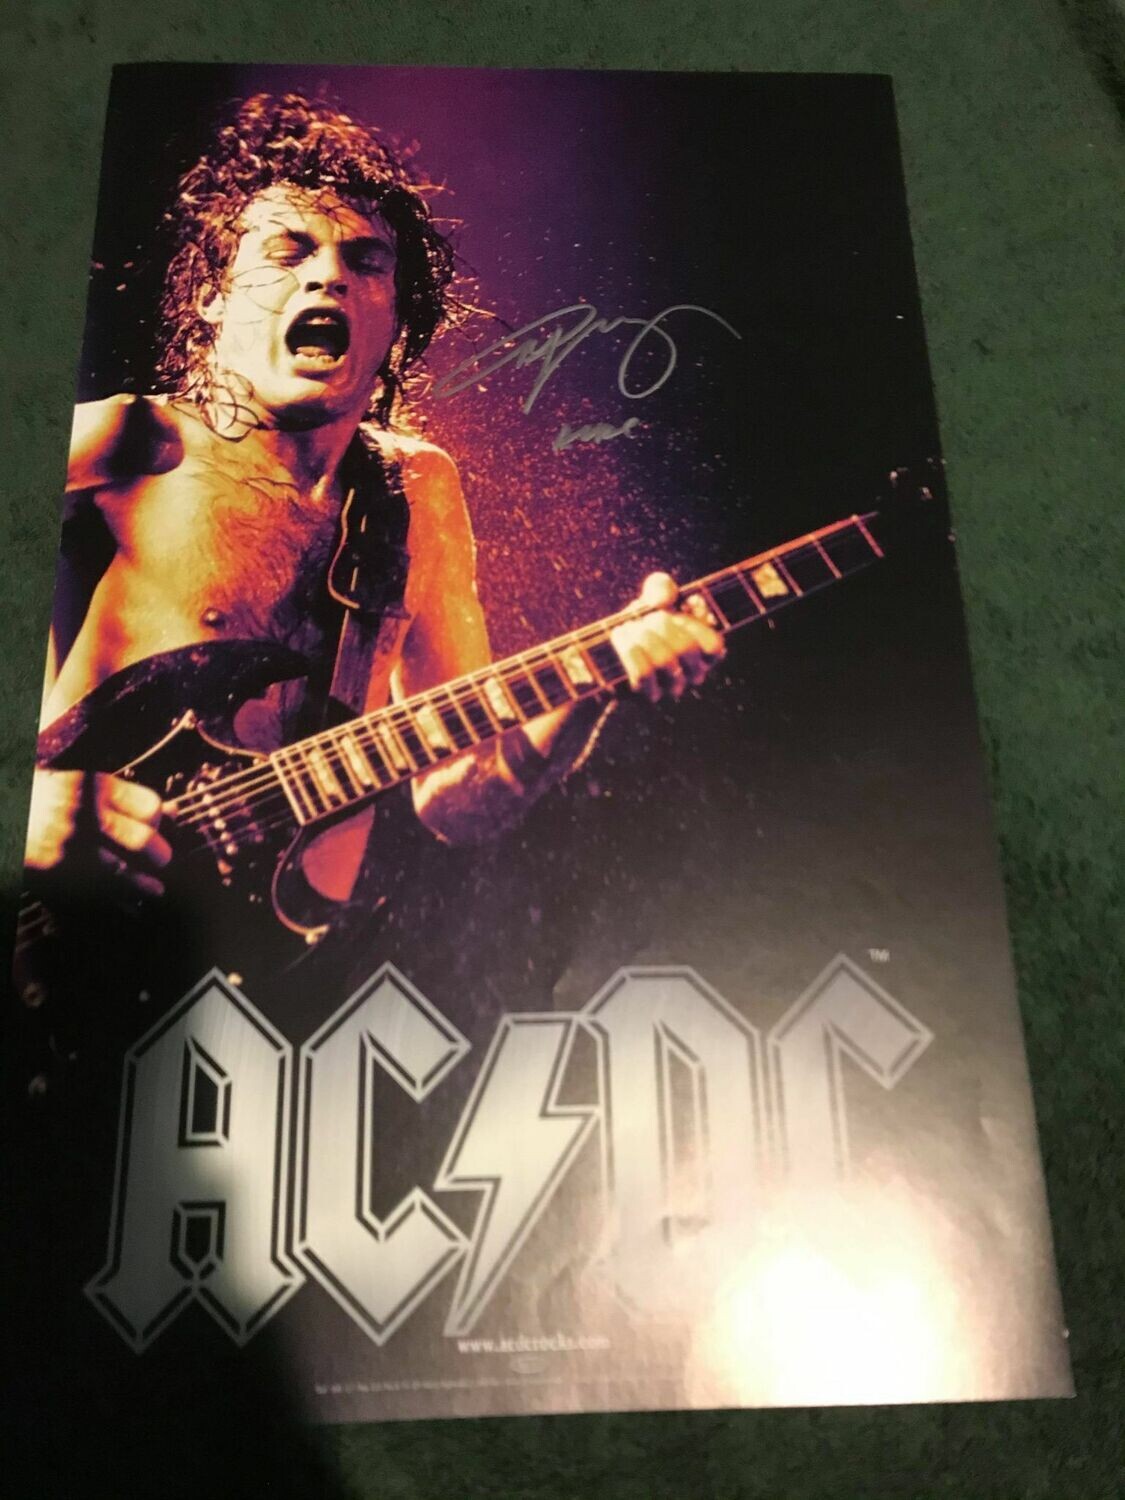 Acdc signed record Autografata AC DC Signed Autograph  Gruppo AC DC